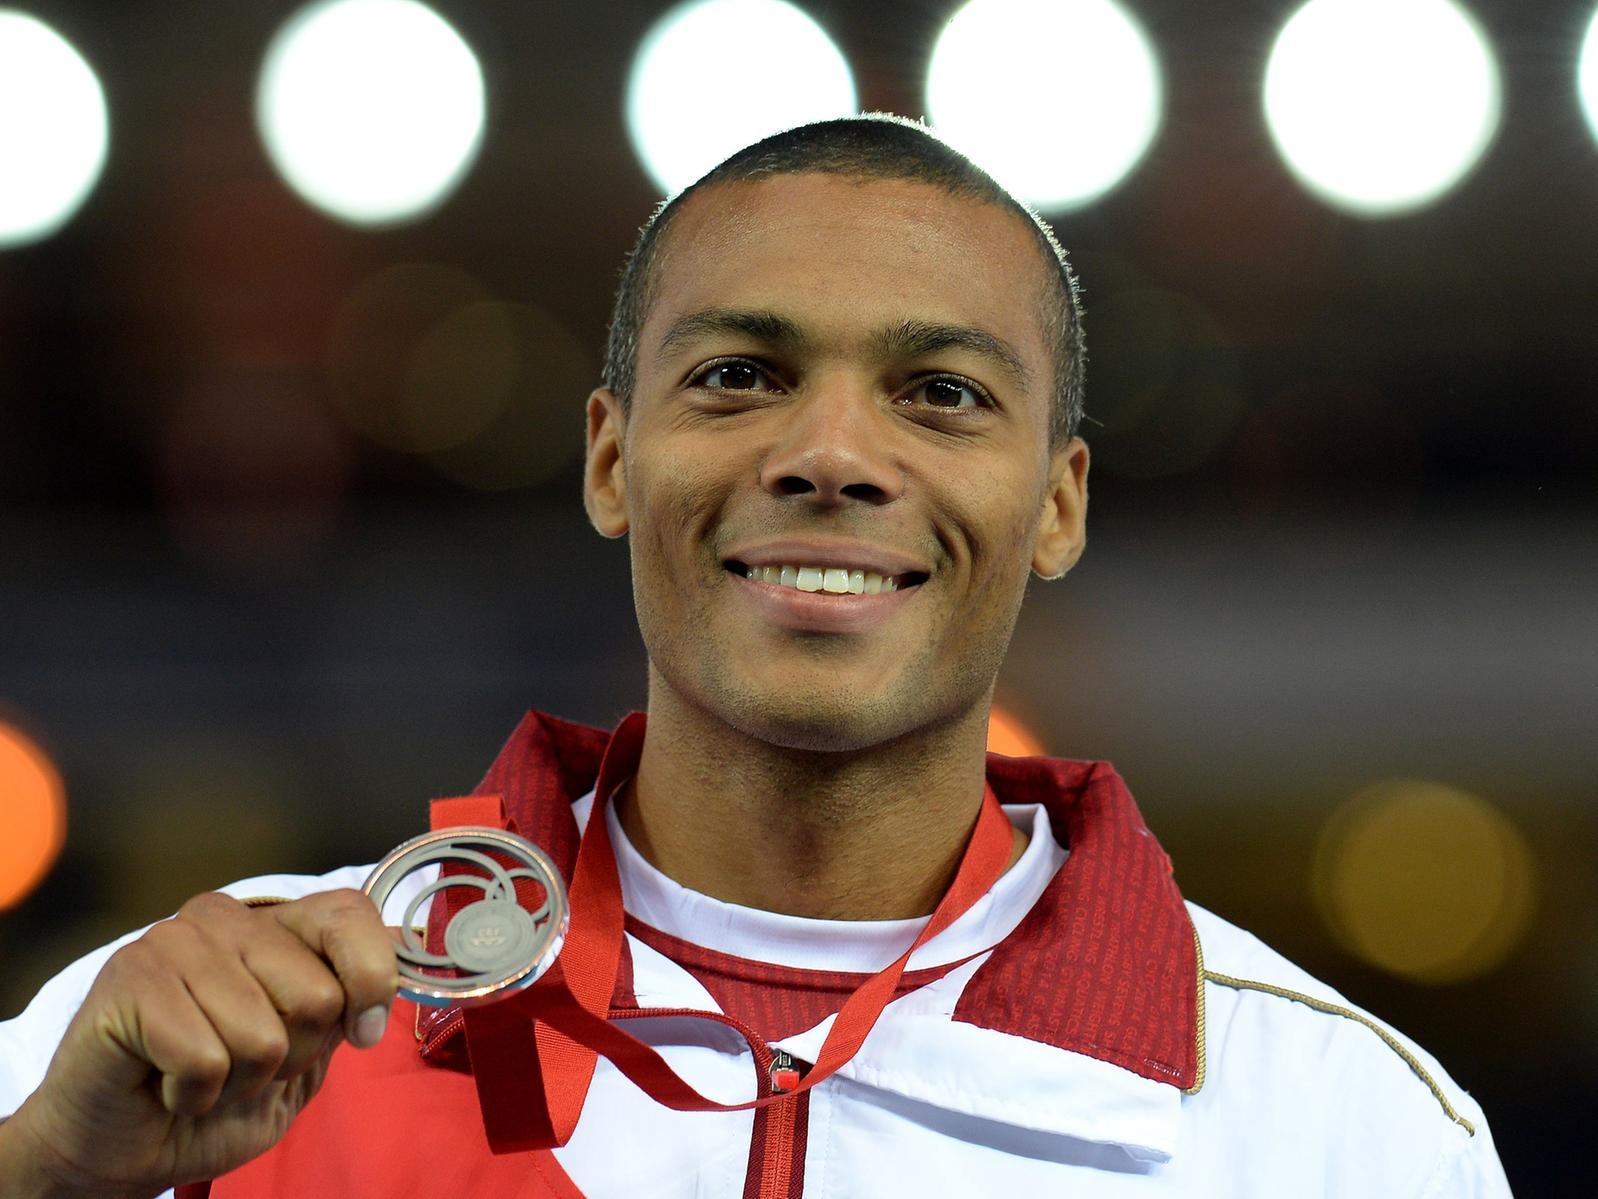 Hurdler William, who grew up on Corby's Exeter estate, had the nation holding its breath as he narrowly missed out on a bronze medal in the 110m hurdles at the 2009 World Athletics Championships. He went on to win silver medals at the Commonwealth Games and the European Championships.